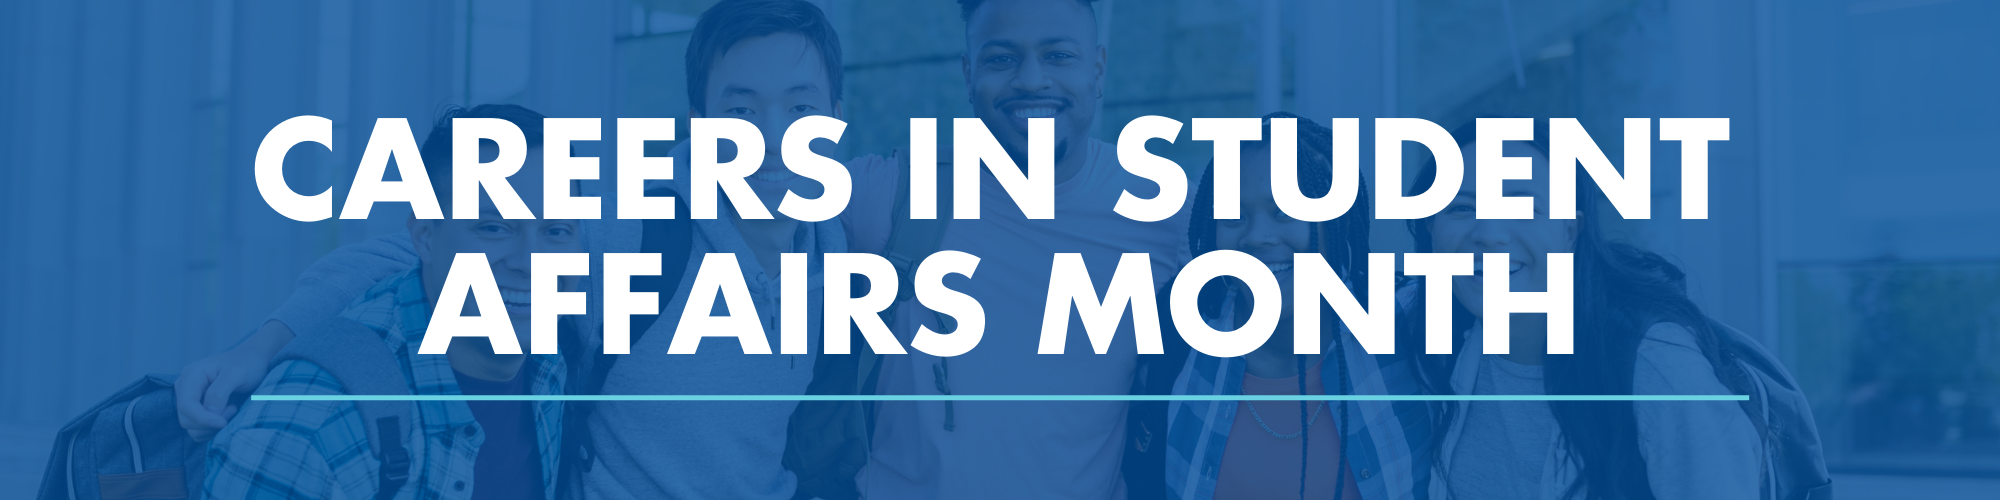 Careers in Student Affairs Month